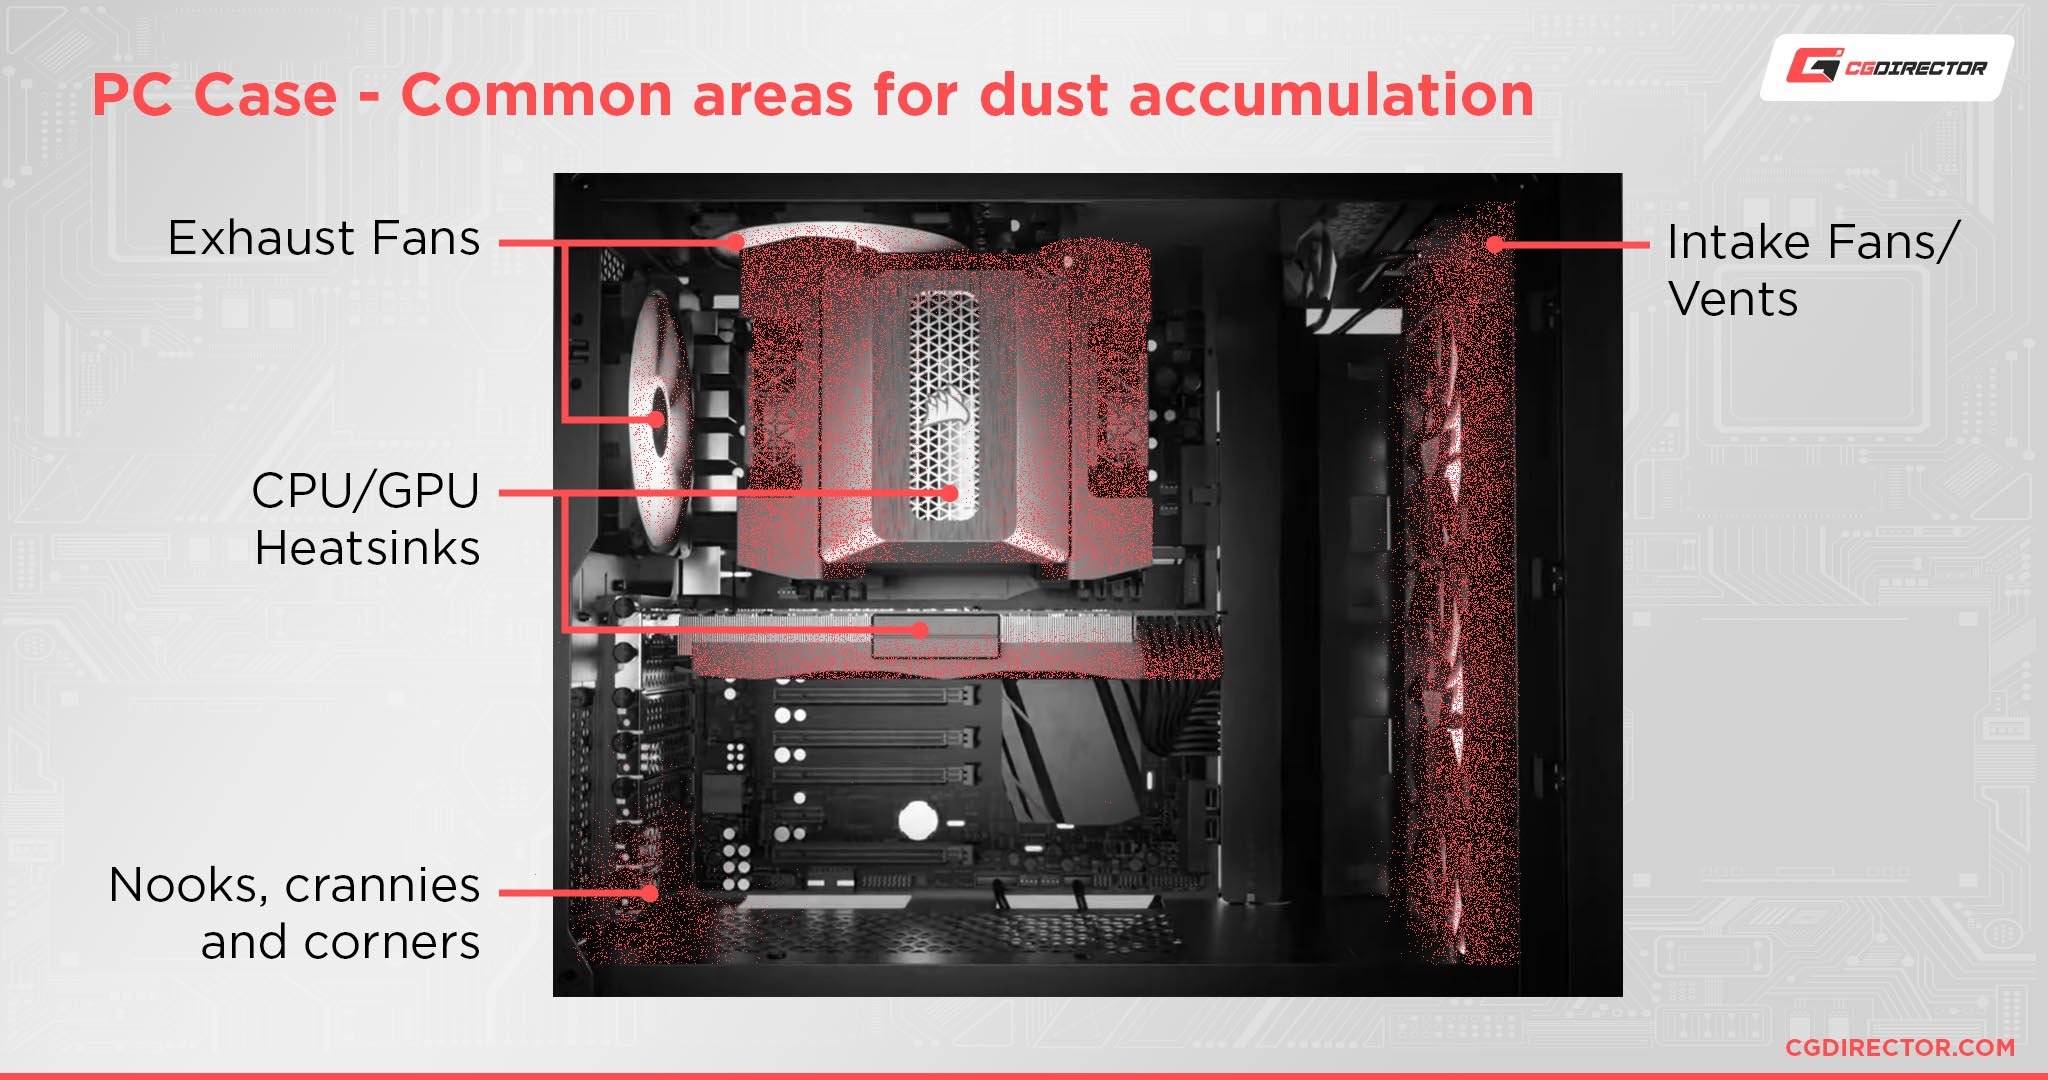 PC Case - Common areas for dust accumulation